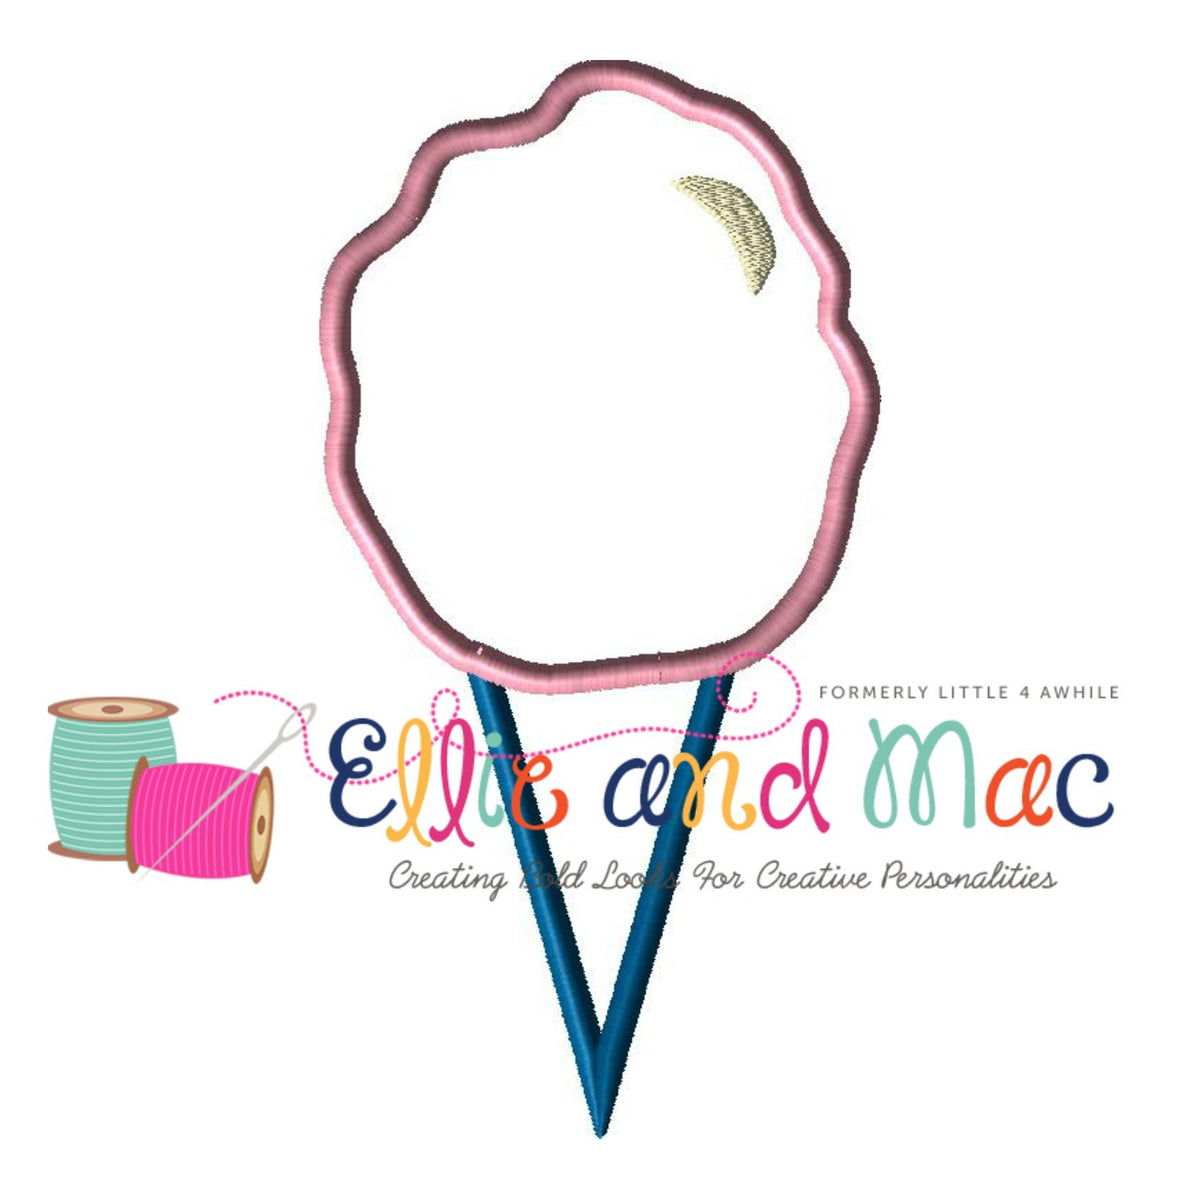 Cotton Candy Applique Embroidery Design - Ellie and Mac, Digital (PDF) Sewing Patterns | USA, Canada, UK, Australia